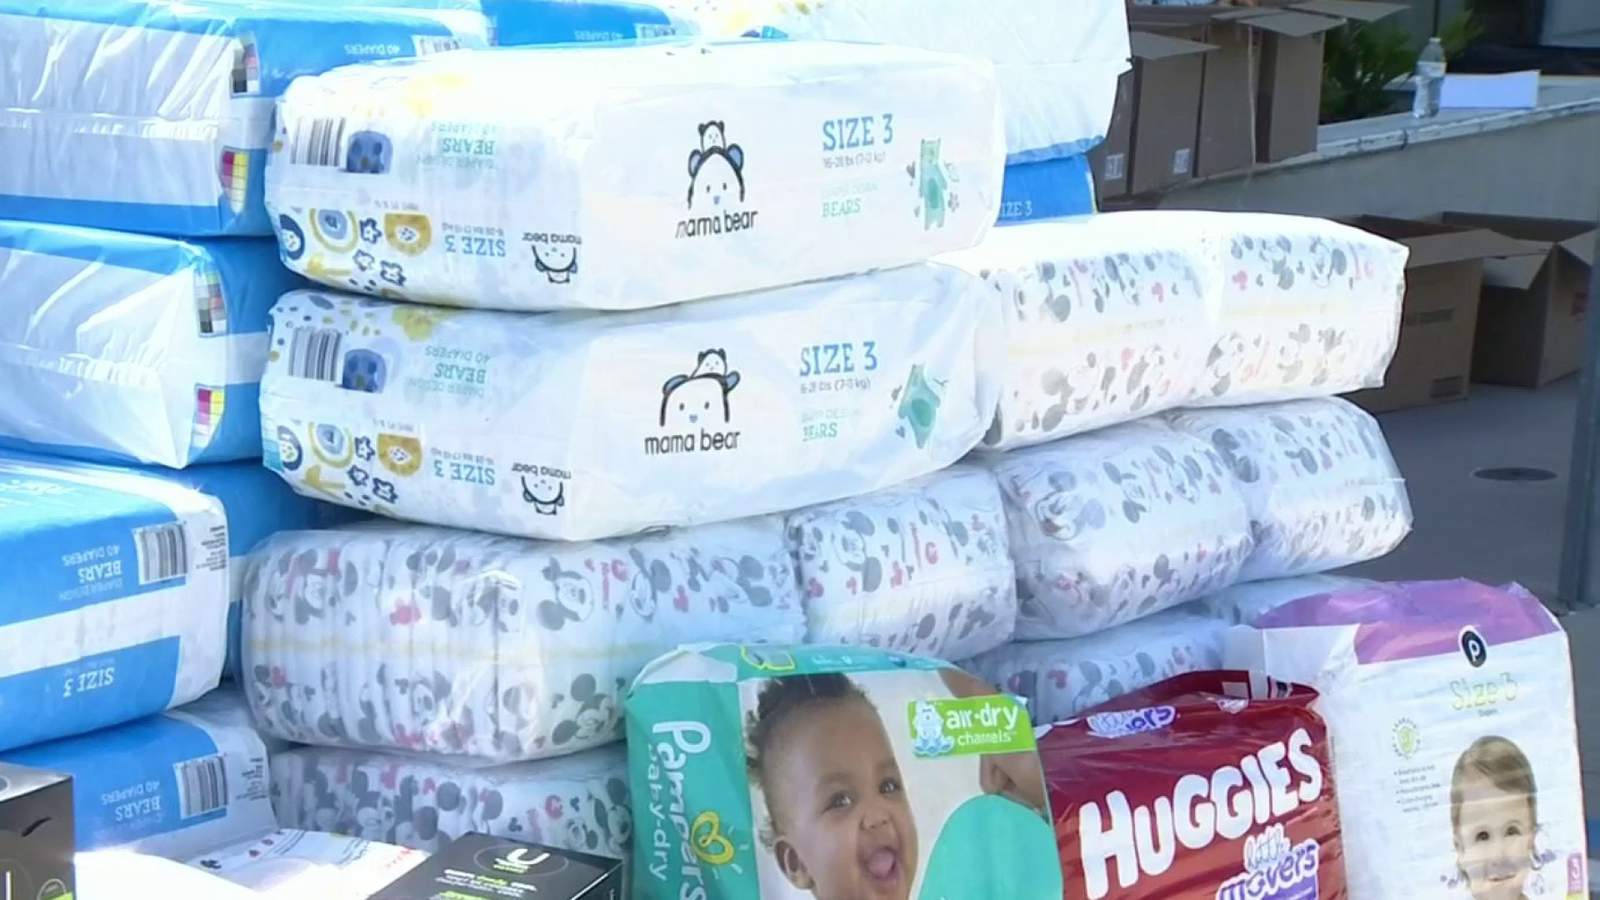 Texas Diaper Bank to host distribution event Saturday